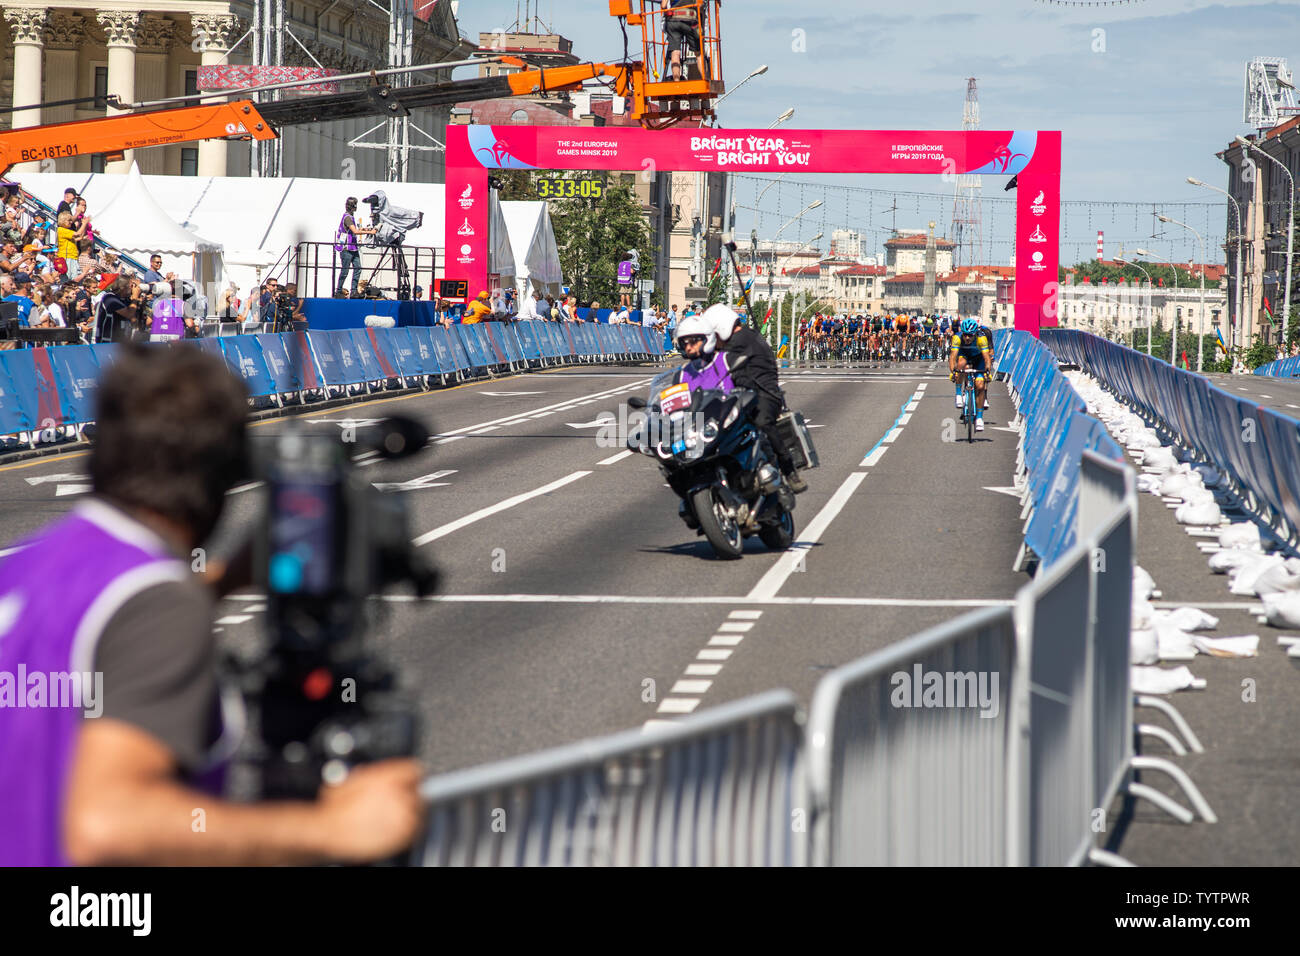 Minsk, Belarus - June 23, 2019. The Cycling Competitions of the 2019 2nd European Games in Minsk, Men's Road Race. Cyclists at the Finish Stock Photo